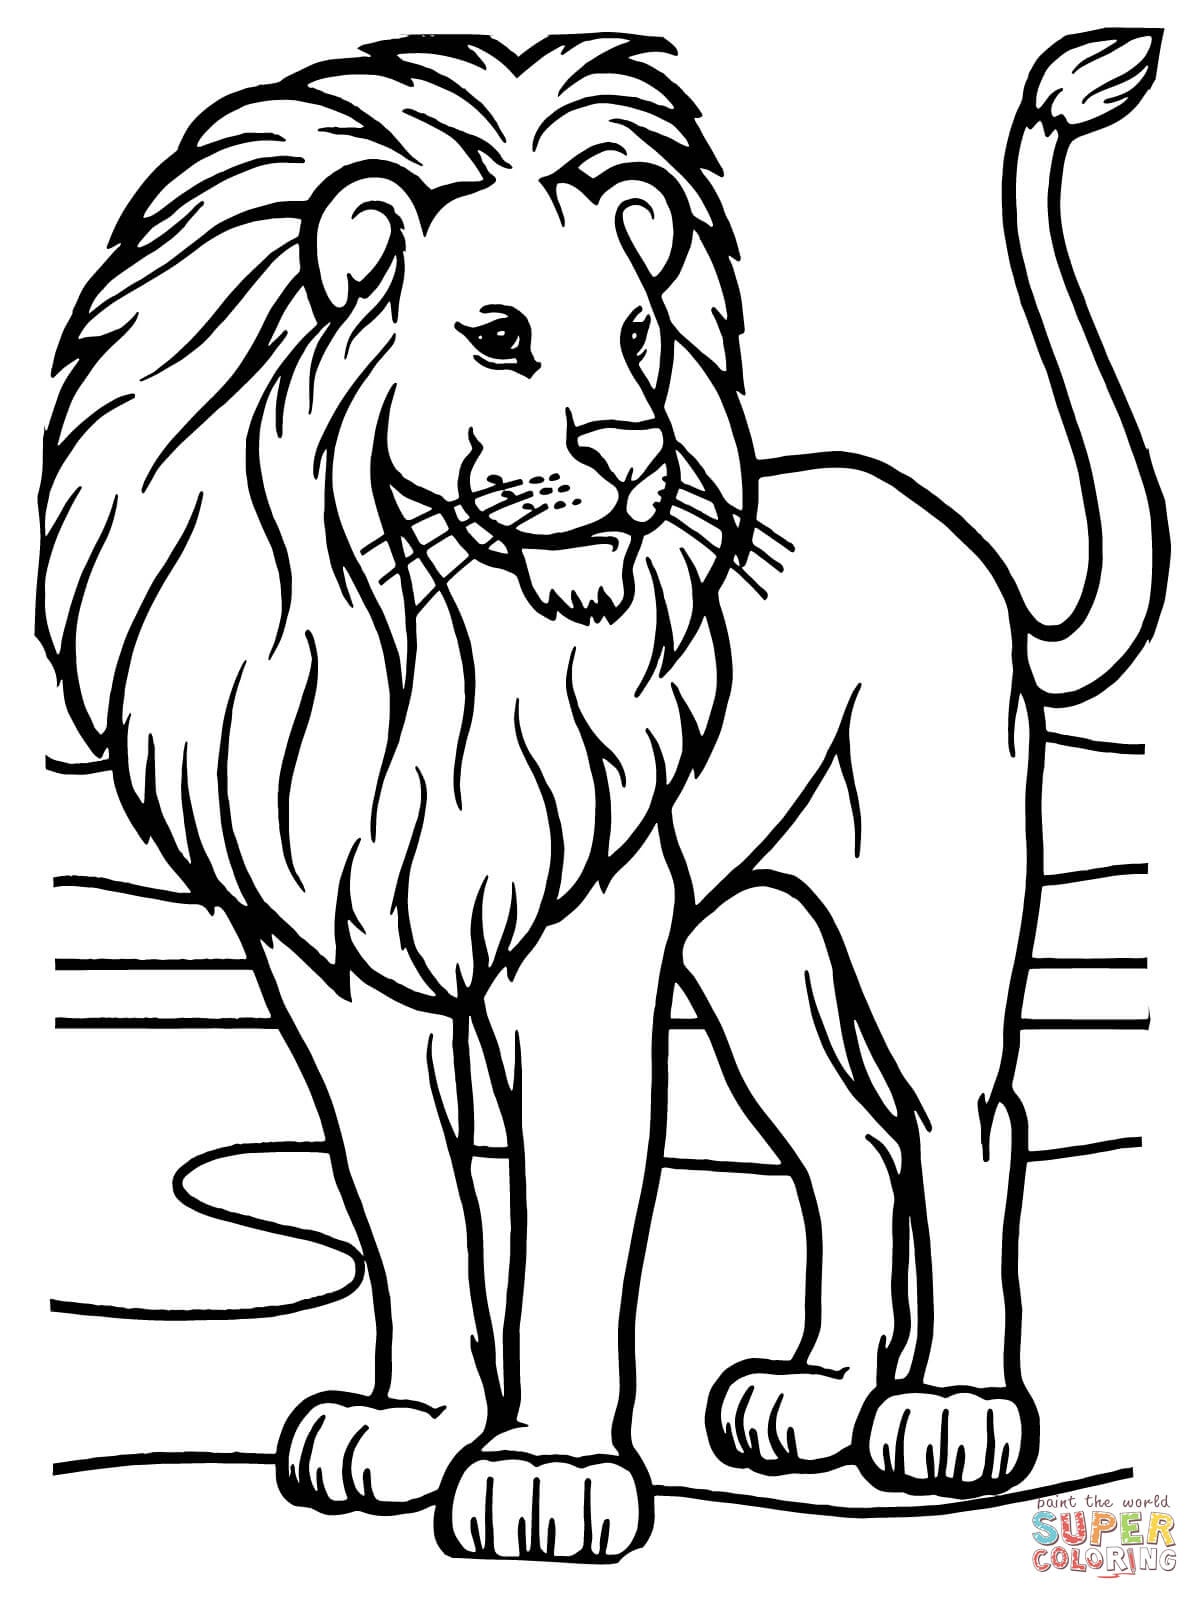 Male African Lion Coloring Page | Free Printable Coloring Pages - Free Printable Picture Of A Lion